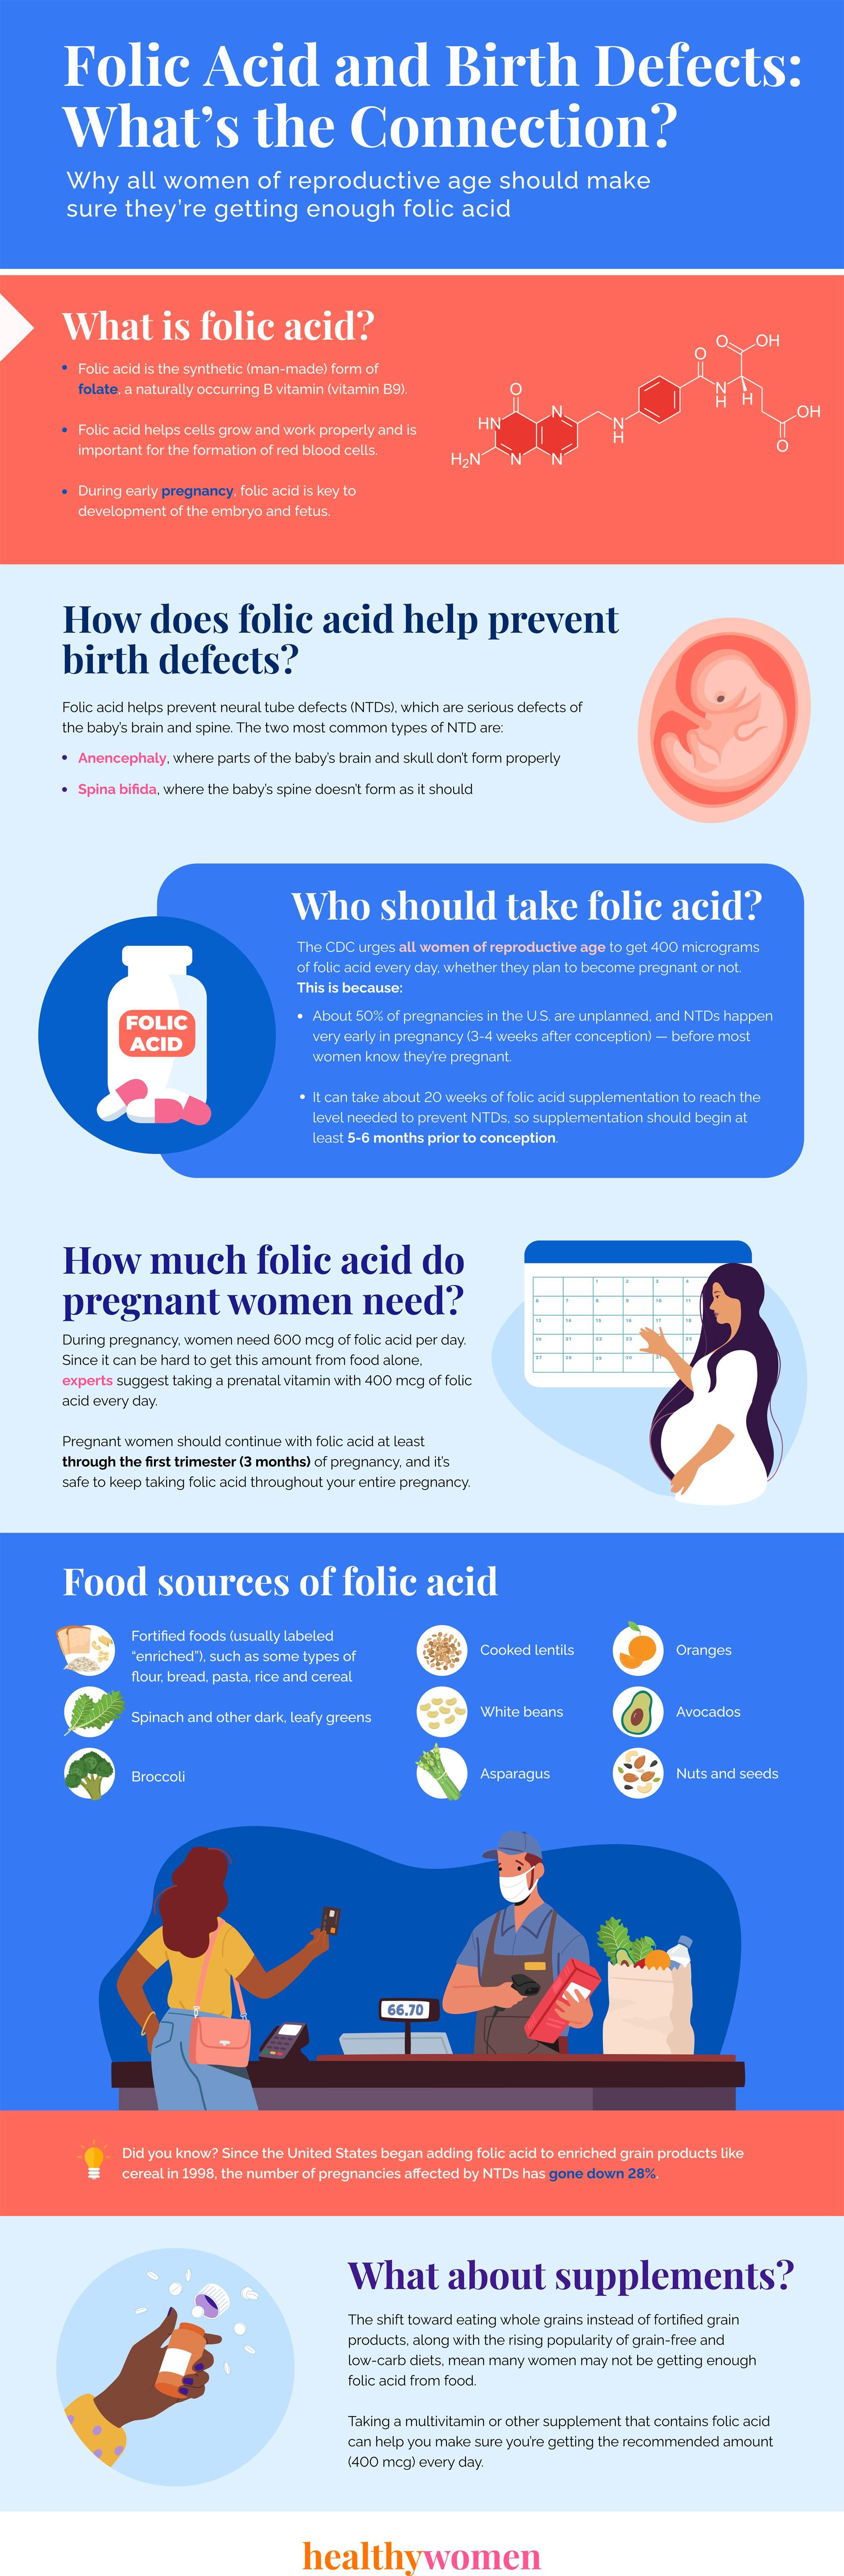 Folic Acid and Birth Defects: What\u2019s the Connection? Infographic - Click the image to open PDF